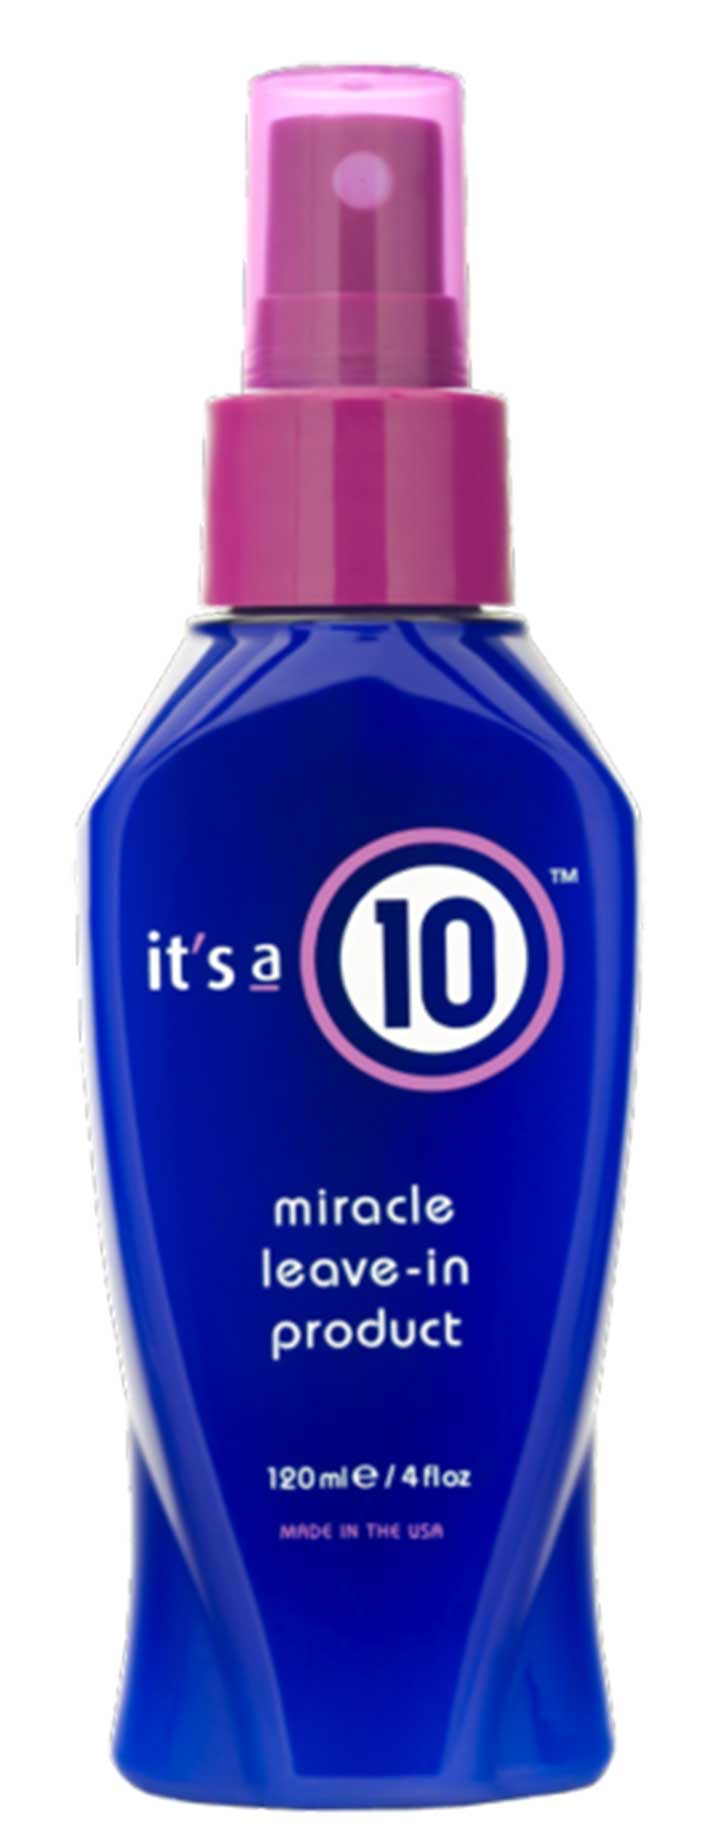 It's a 10 Miracle Leave-in Product